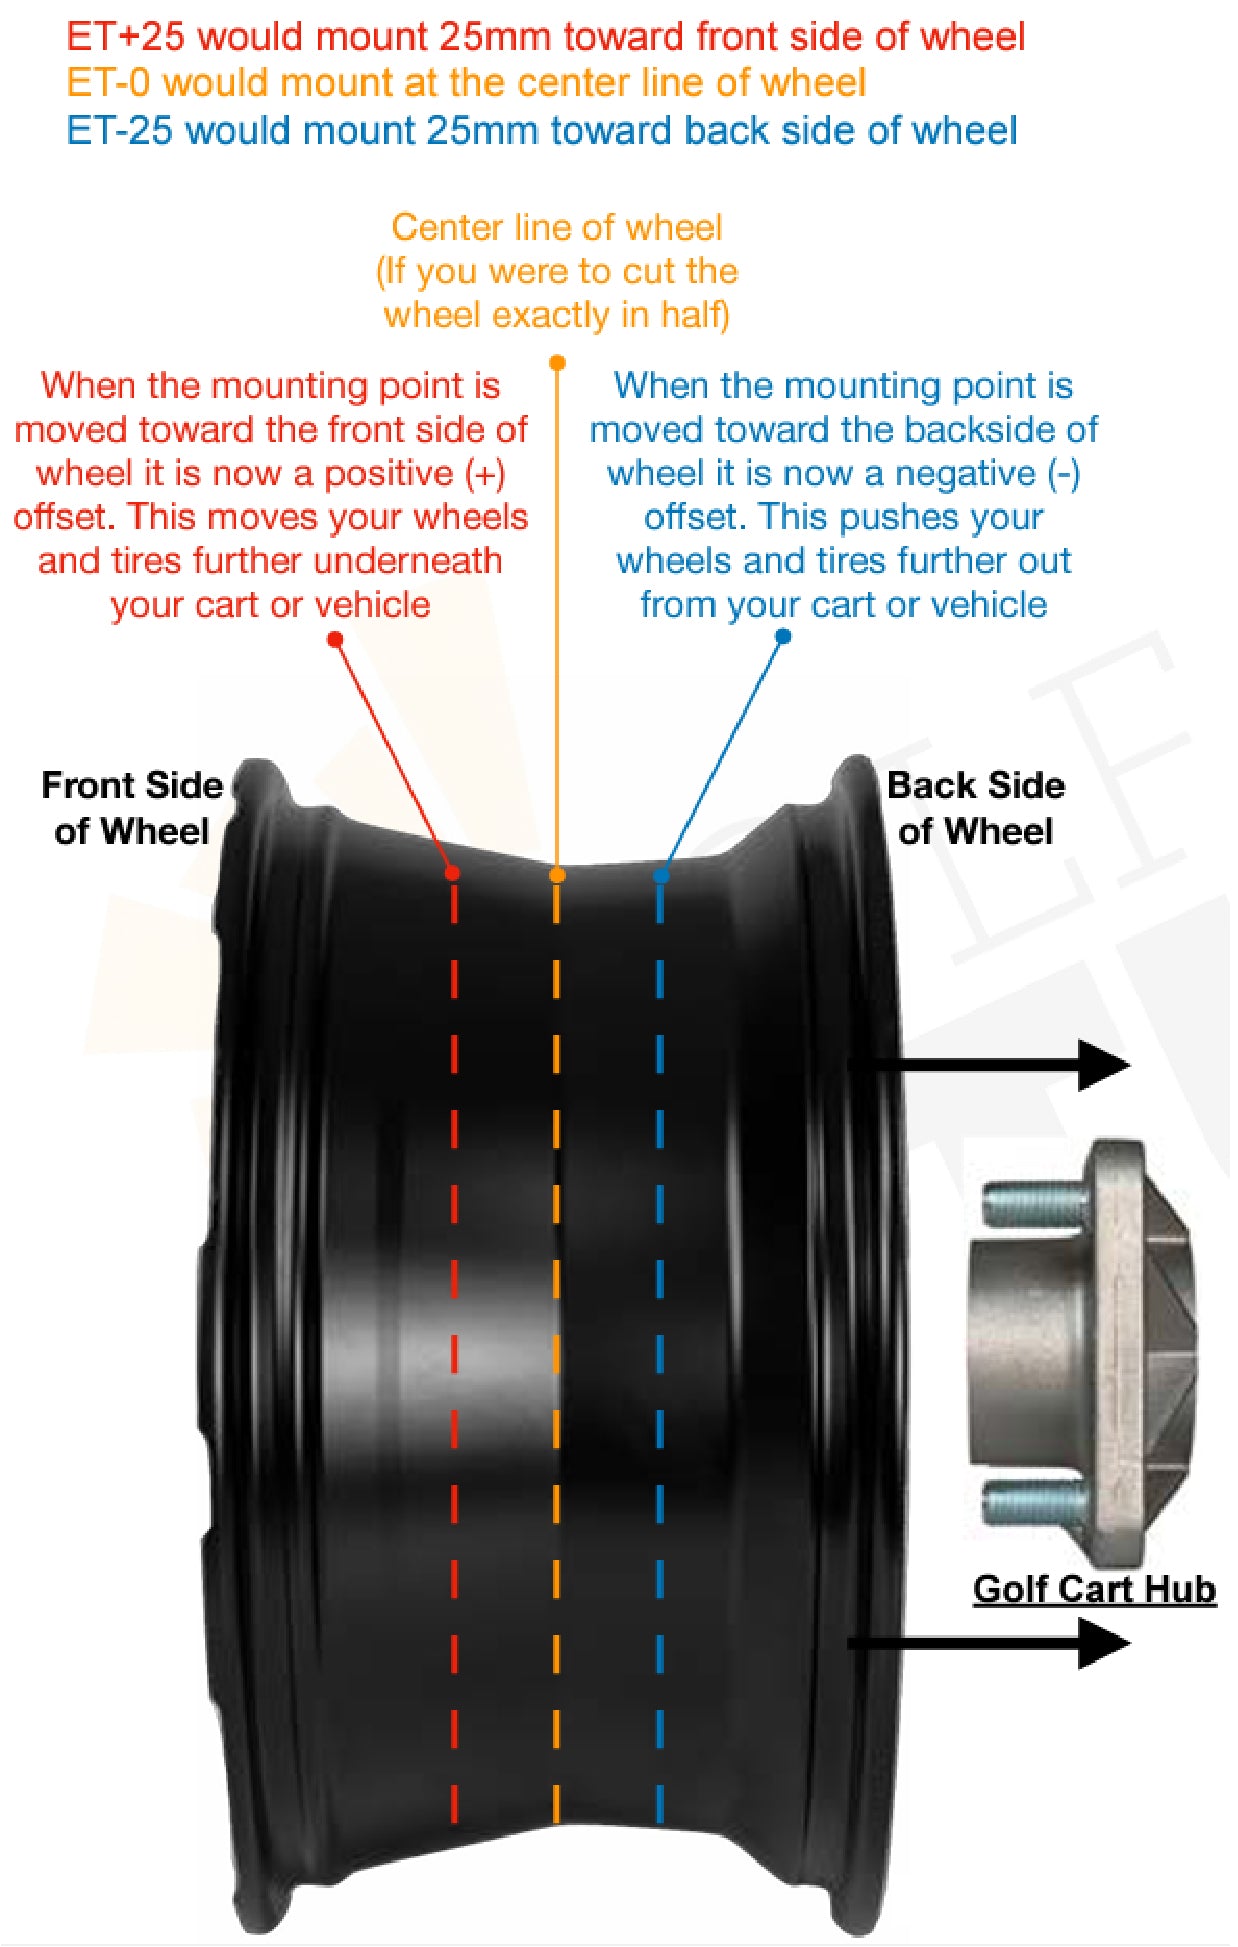 Golf Cart Wheel Offset Example. Covers Positive, Negative, and Neutral Offsets